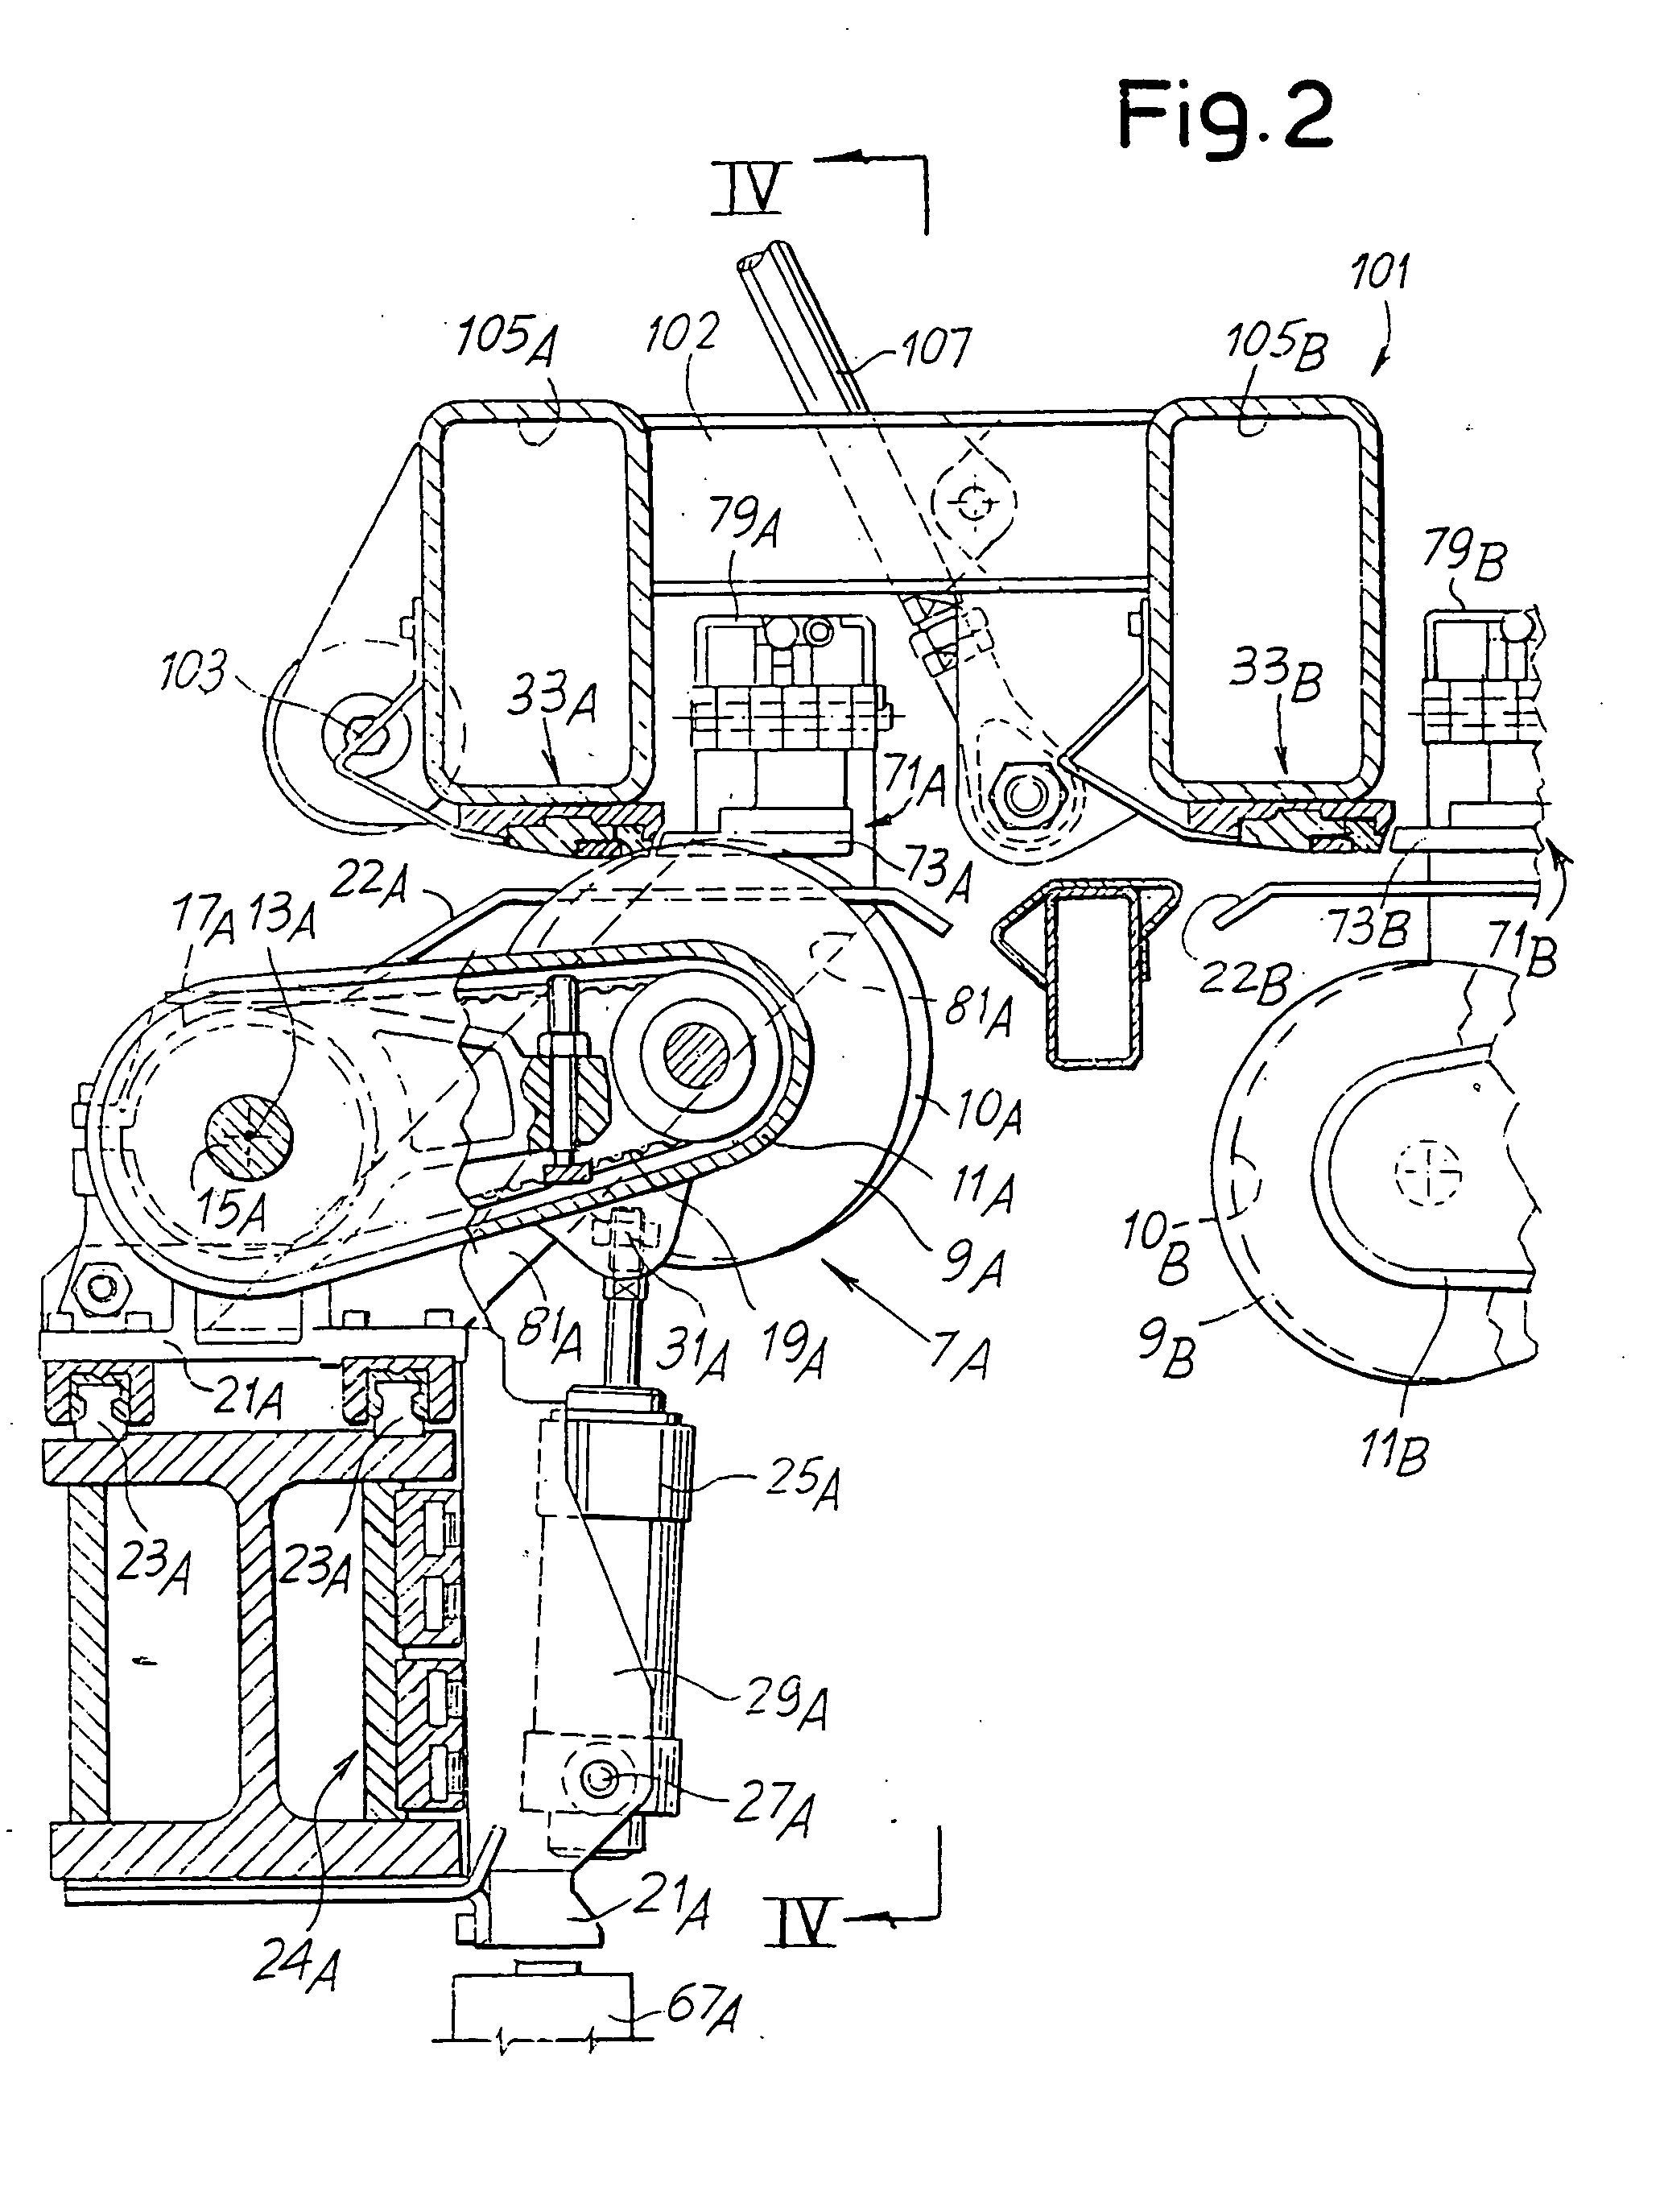 Device for longitudinal cutting of a continuous web material, such as corrugated cardboard